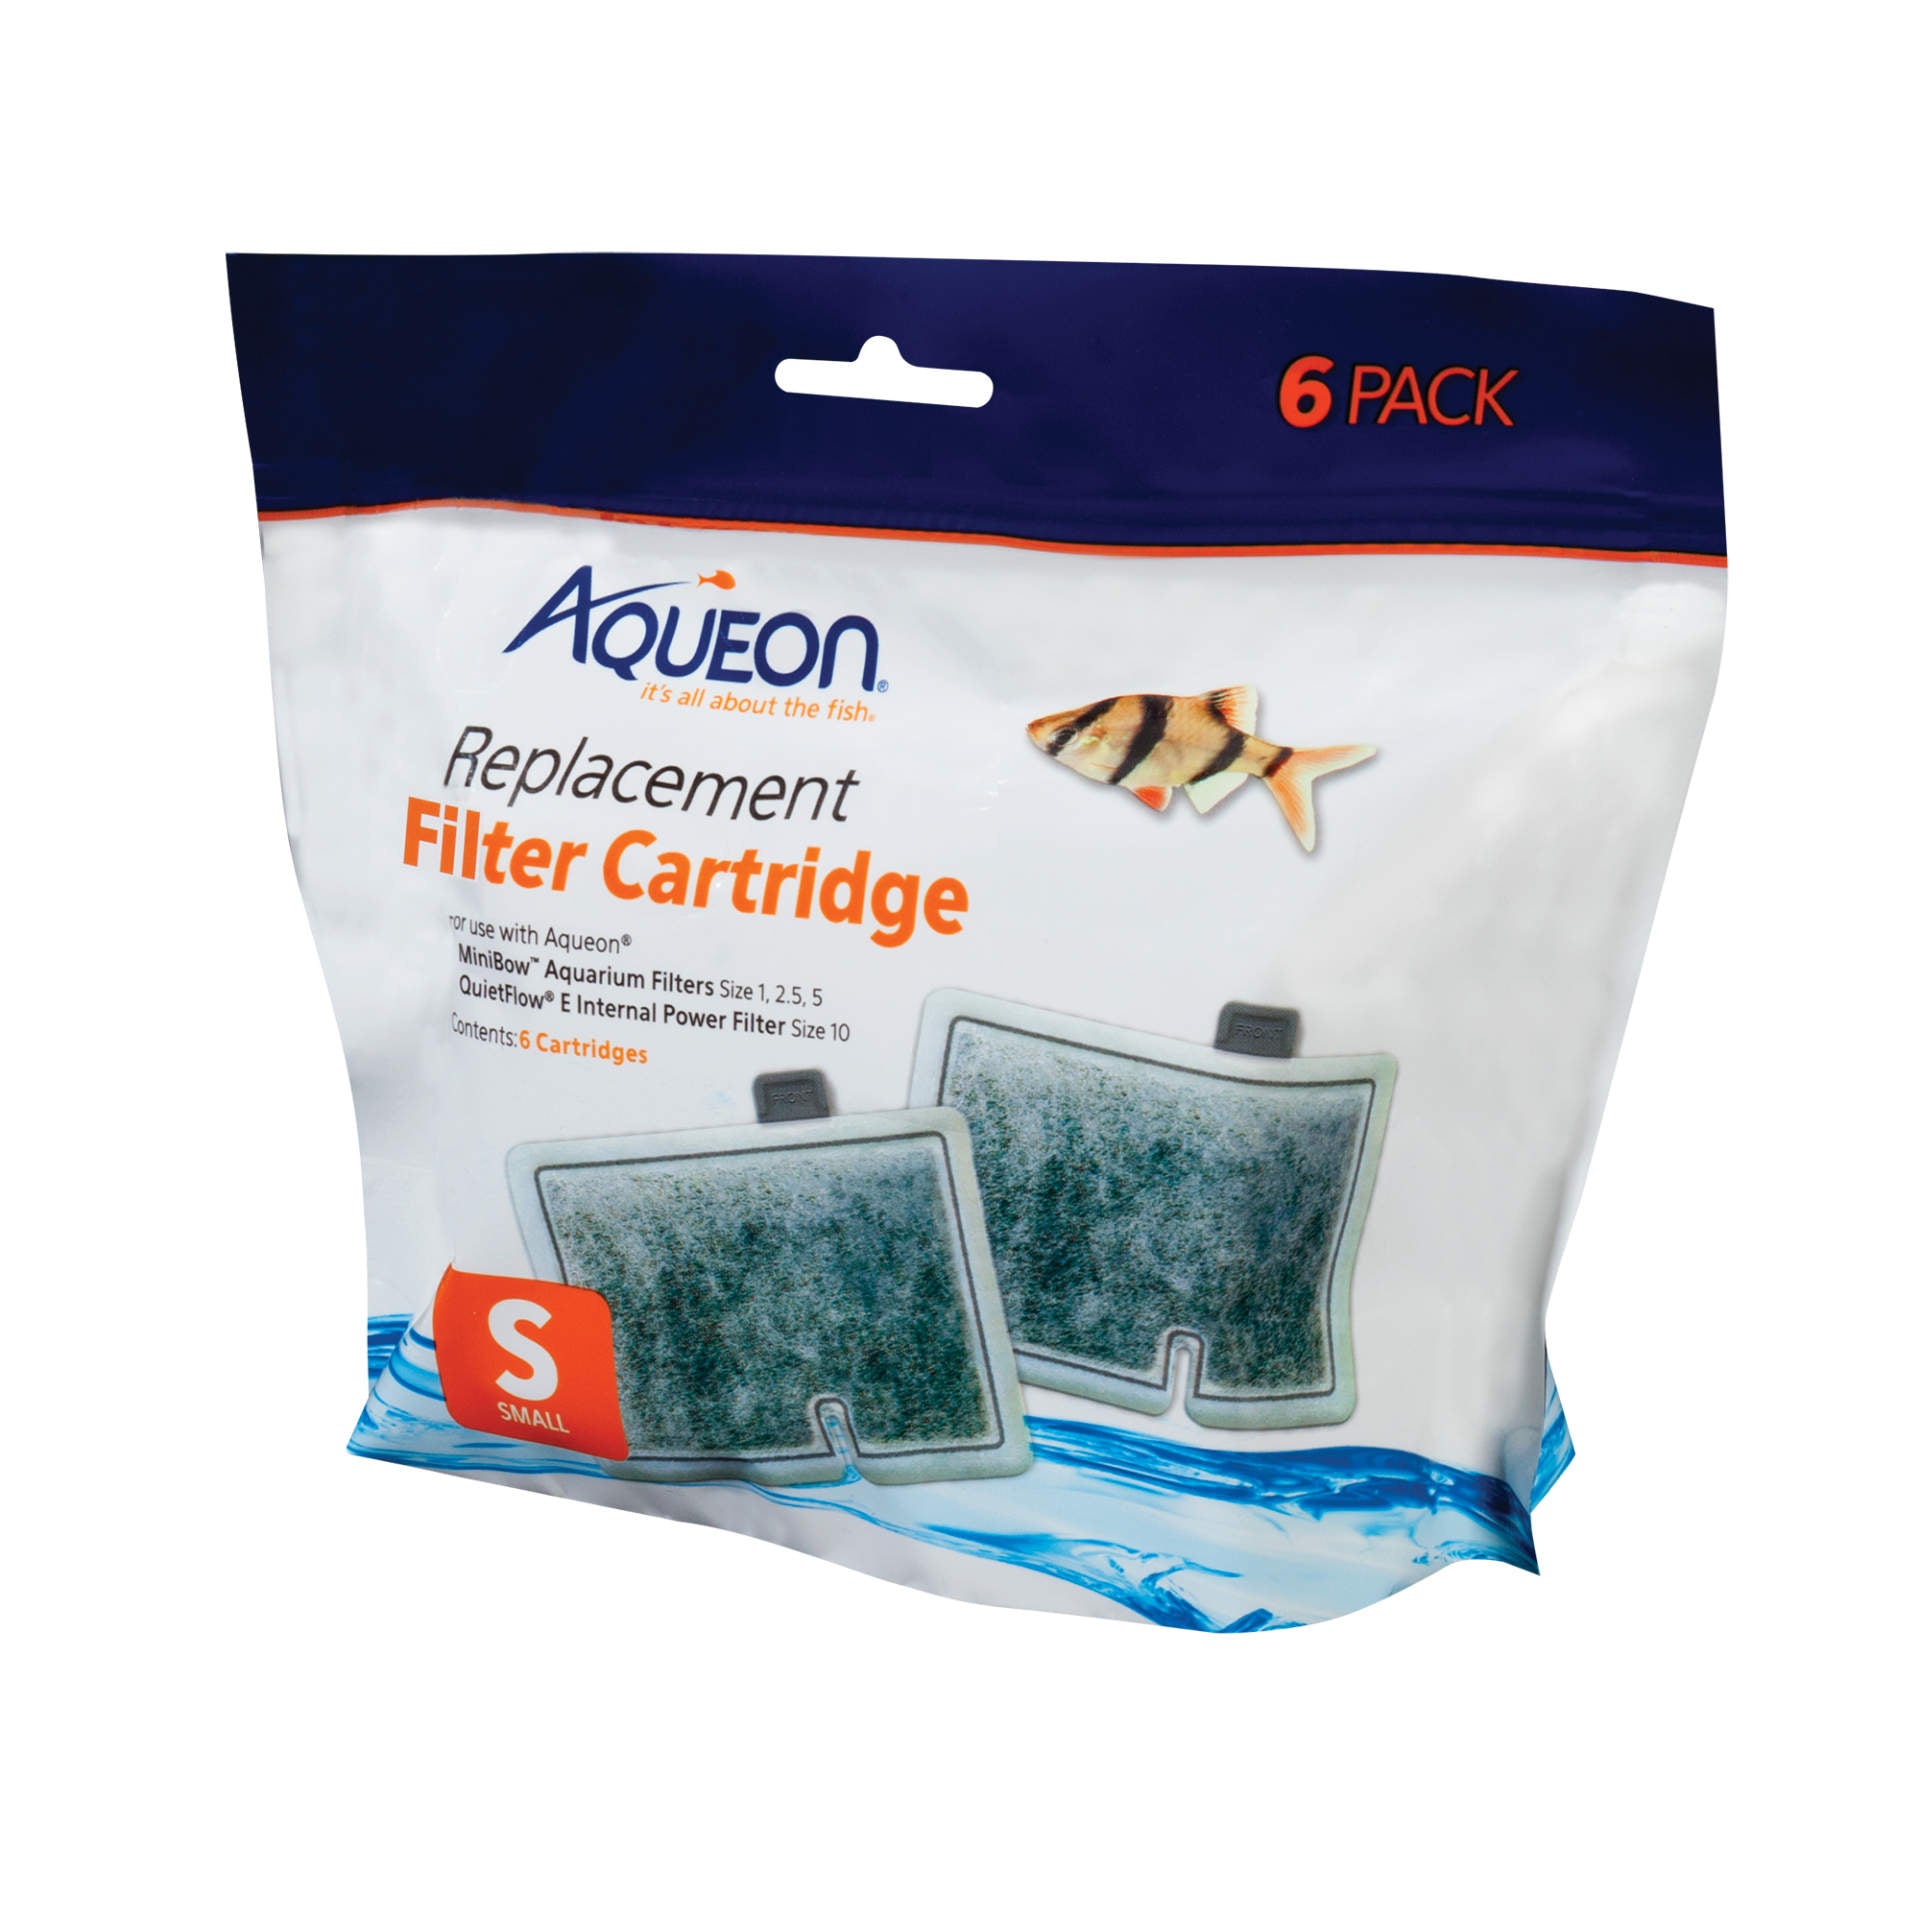 Aqueon Replacement Filter Cartridges 6 pack Small 6.2″ x 2″ x 6.2″